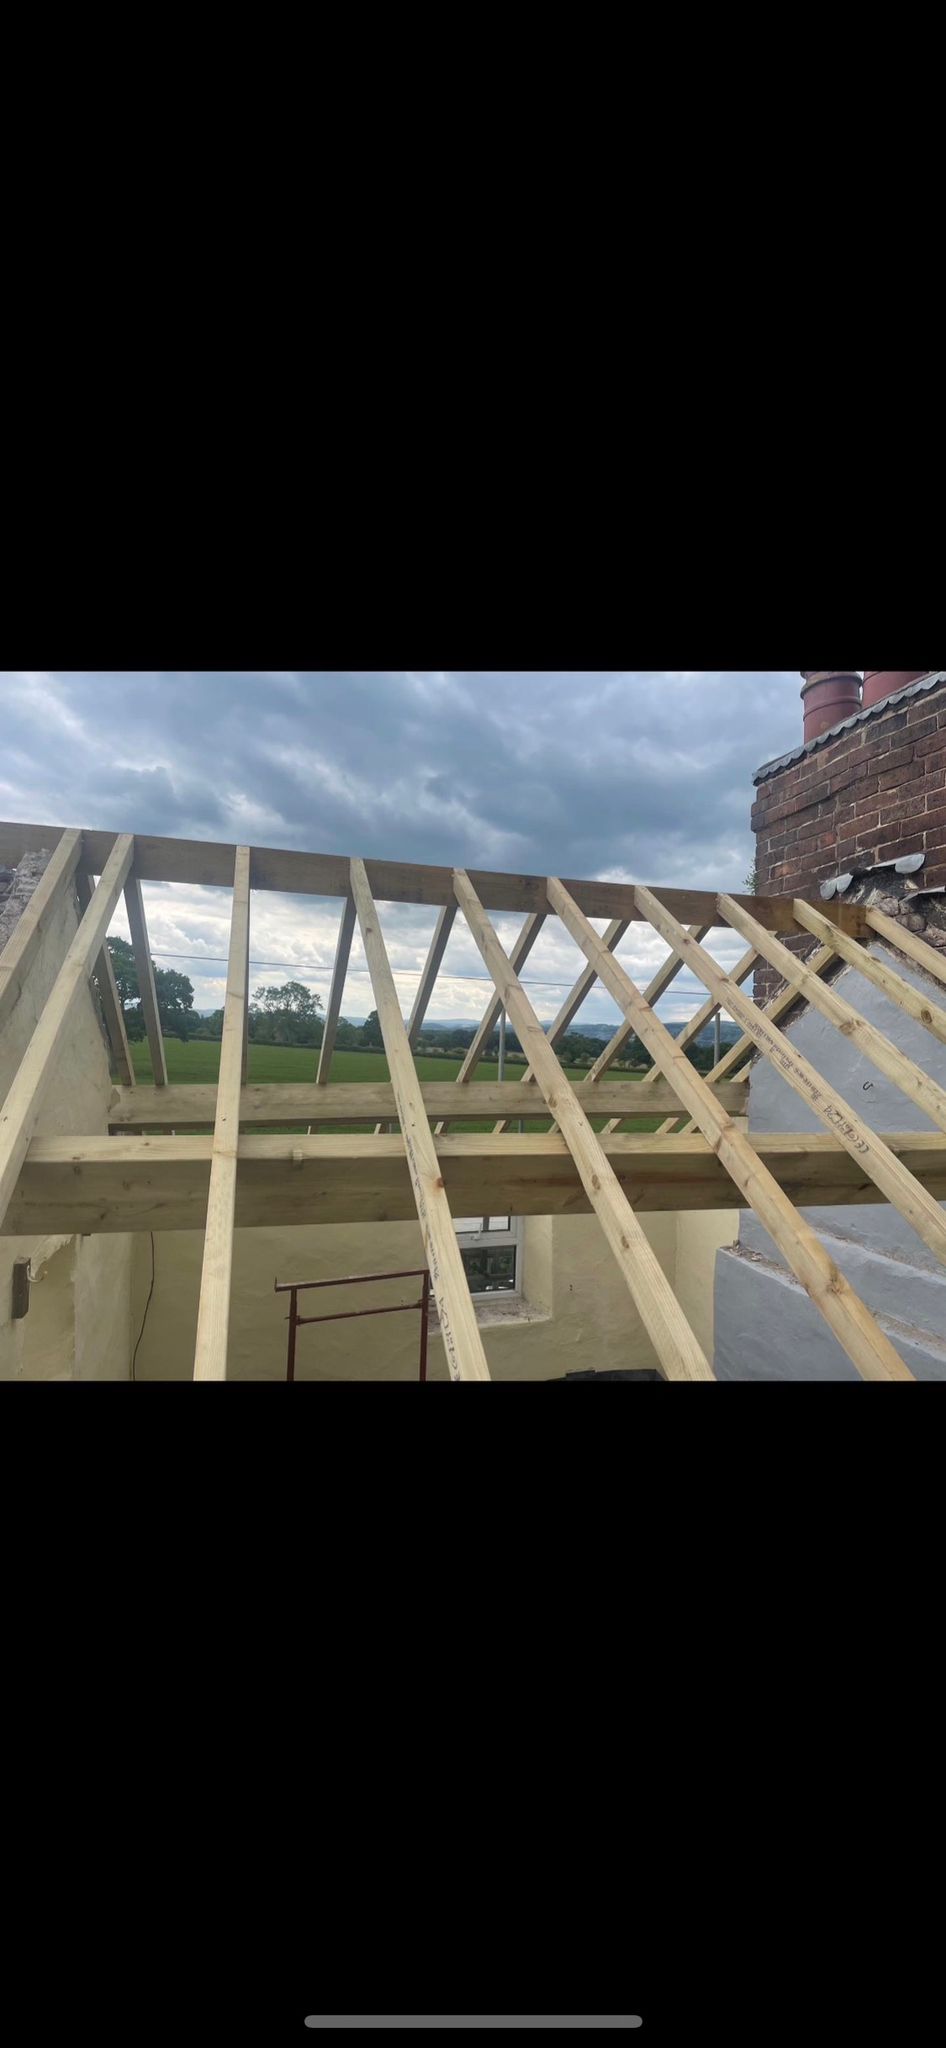 Timberwork Roof Contractors Clwt-y-bont, LL55 - DD Roofing